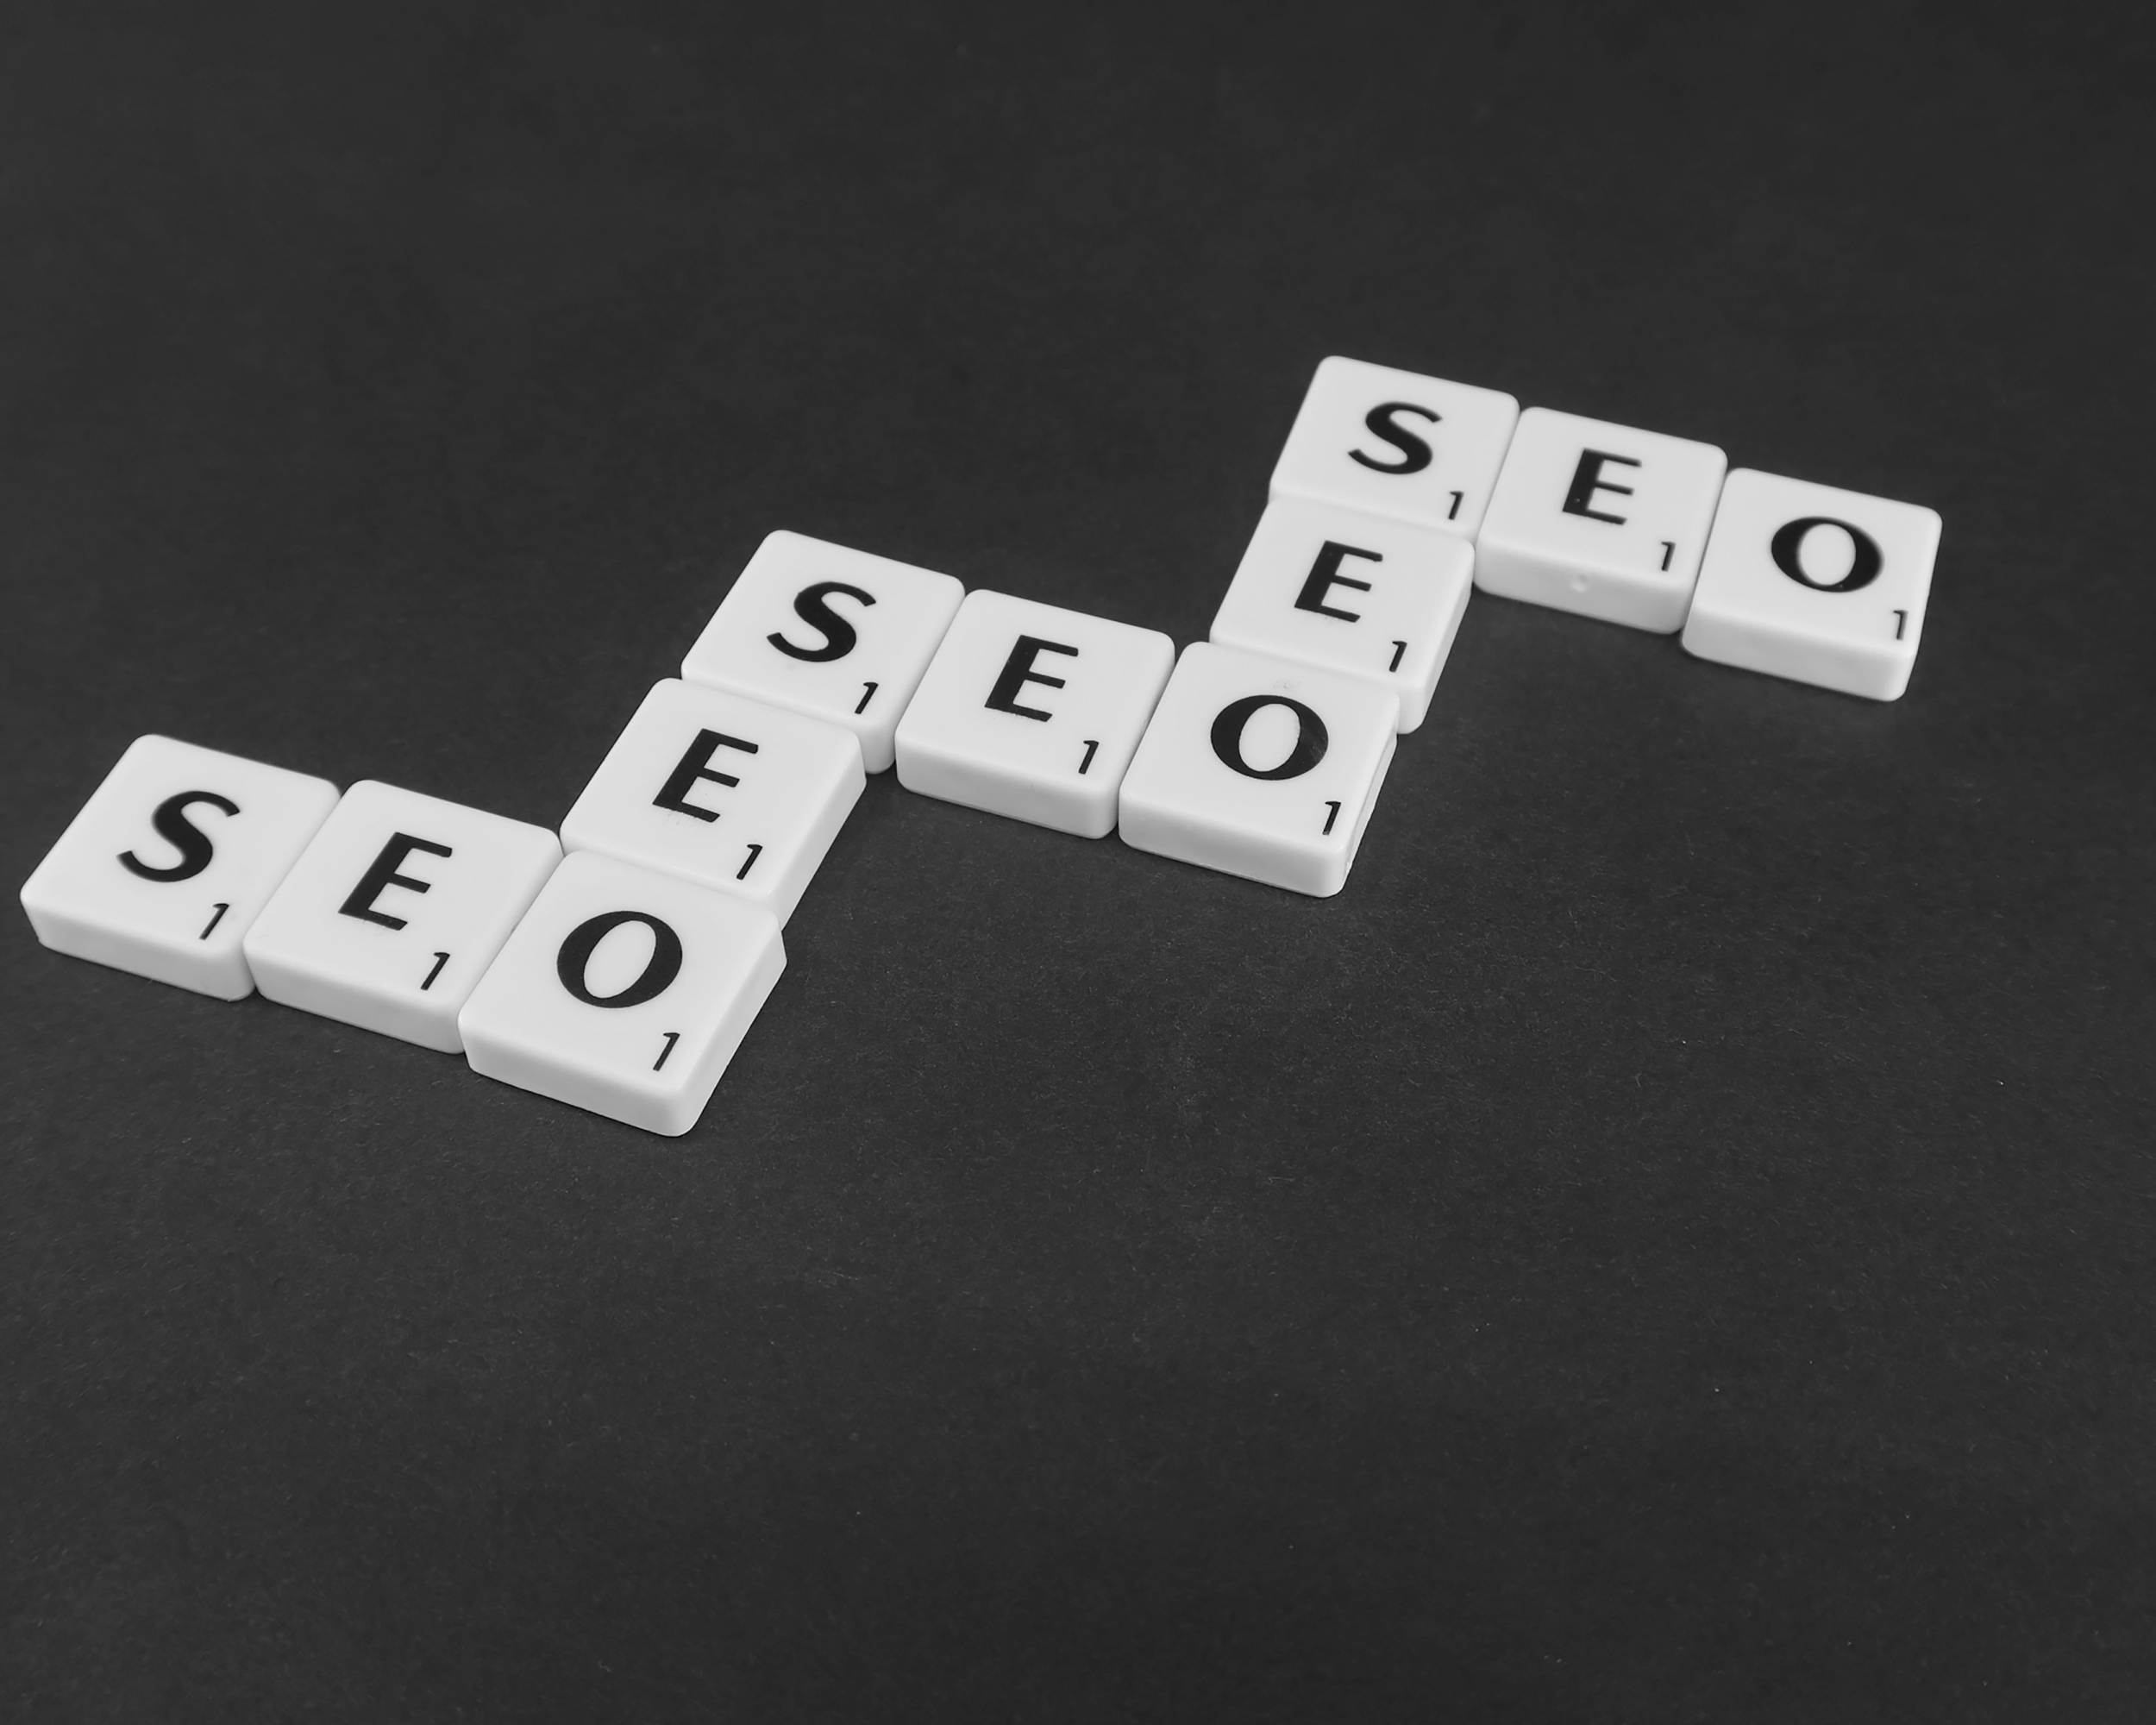 13 Tried-and-True Article Writing SEO Tips